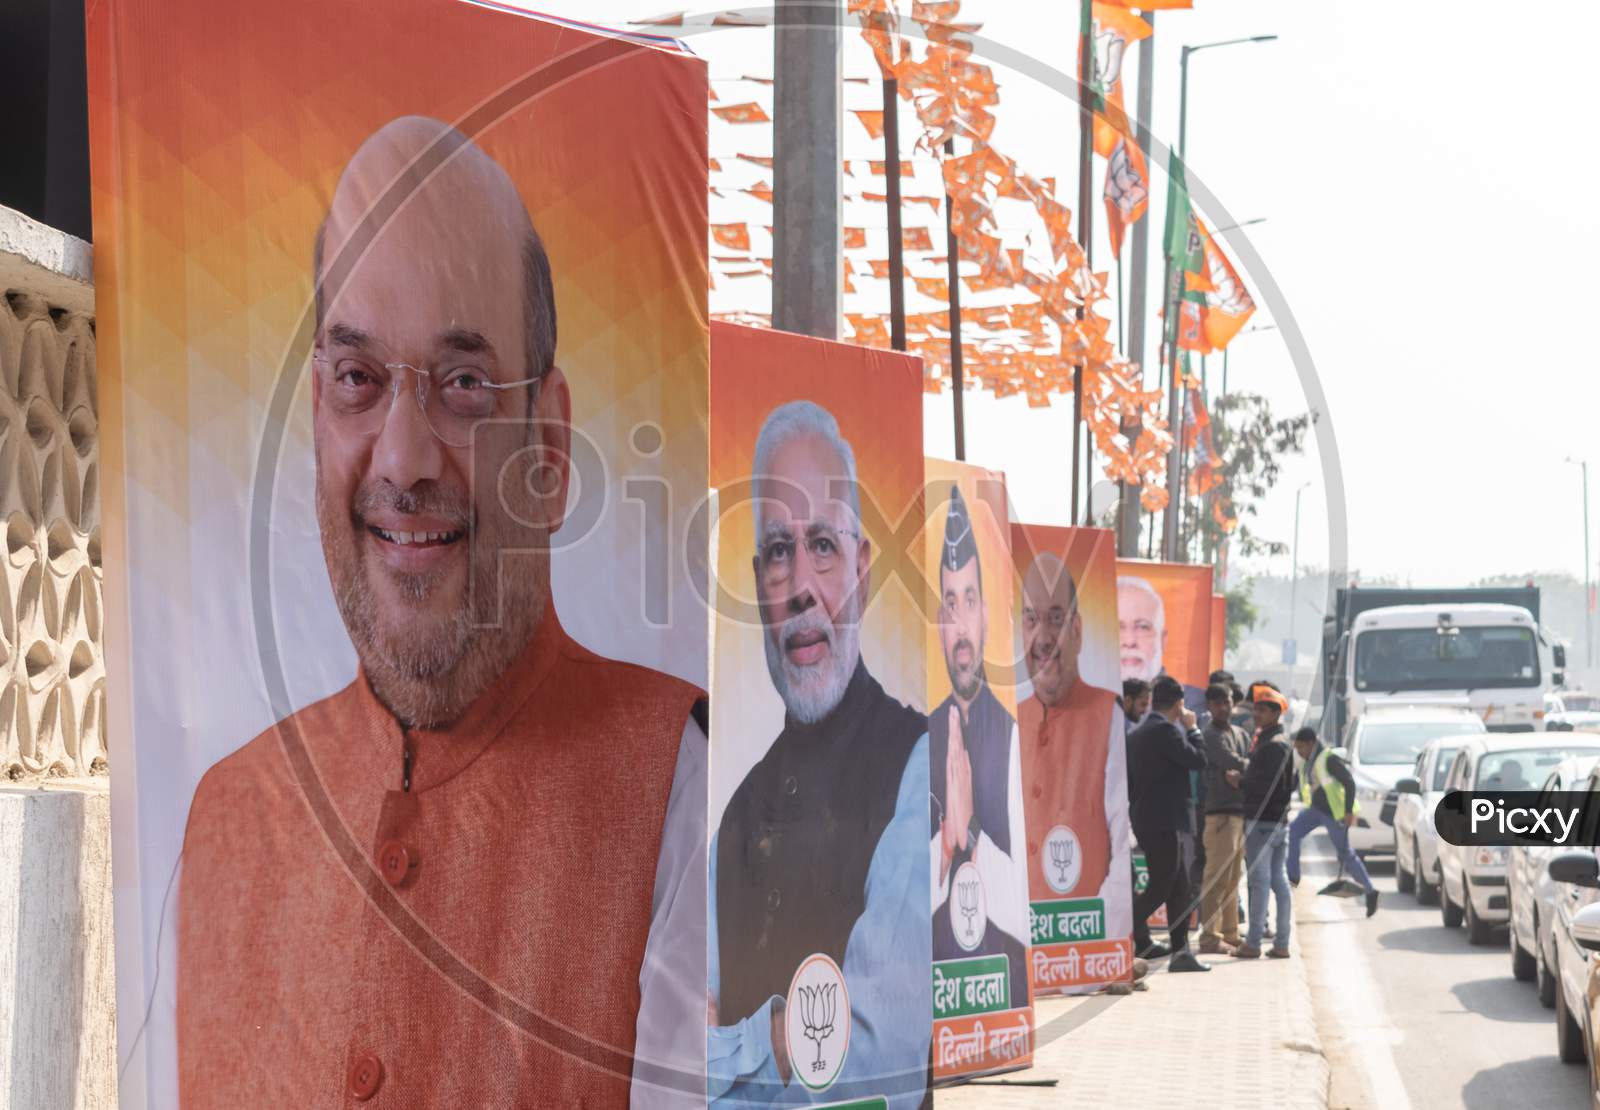 Pictures of Amit Shah and Narendra Modi on hoardings during Bharatiya Janata Party BJP campaign for Delhi Assembly Election 2020